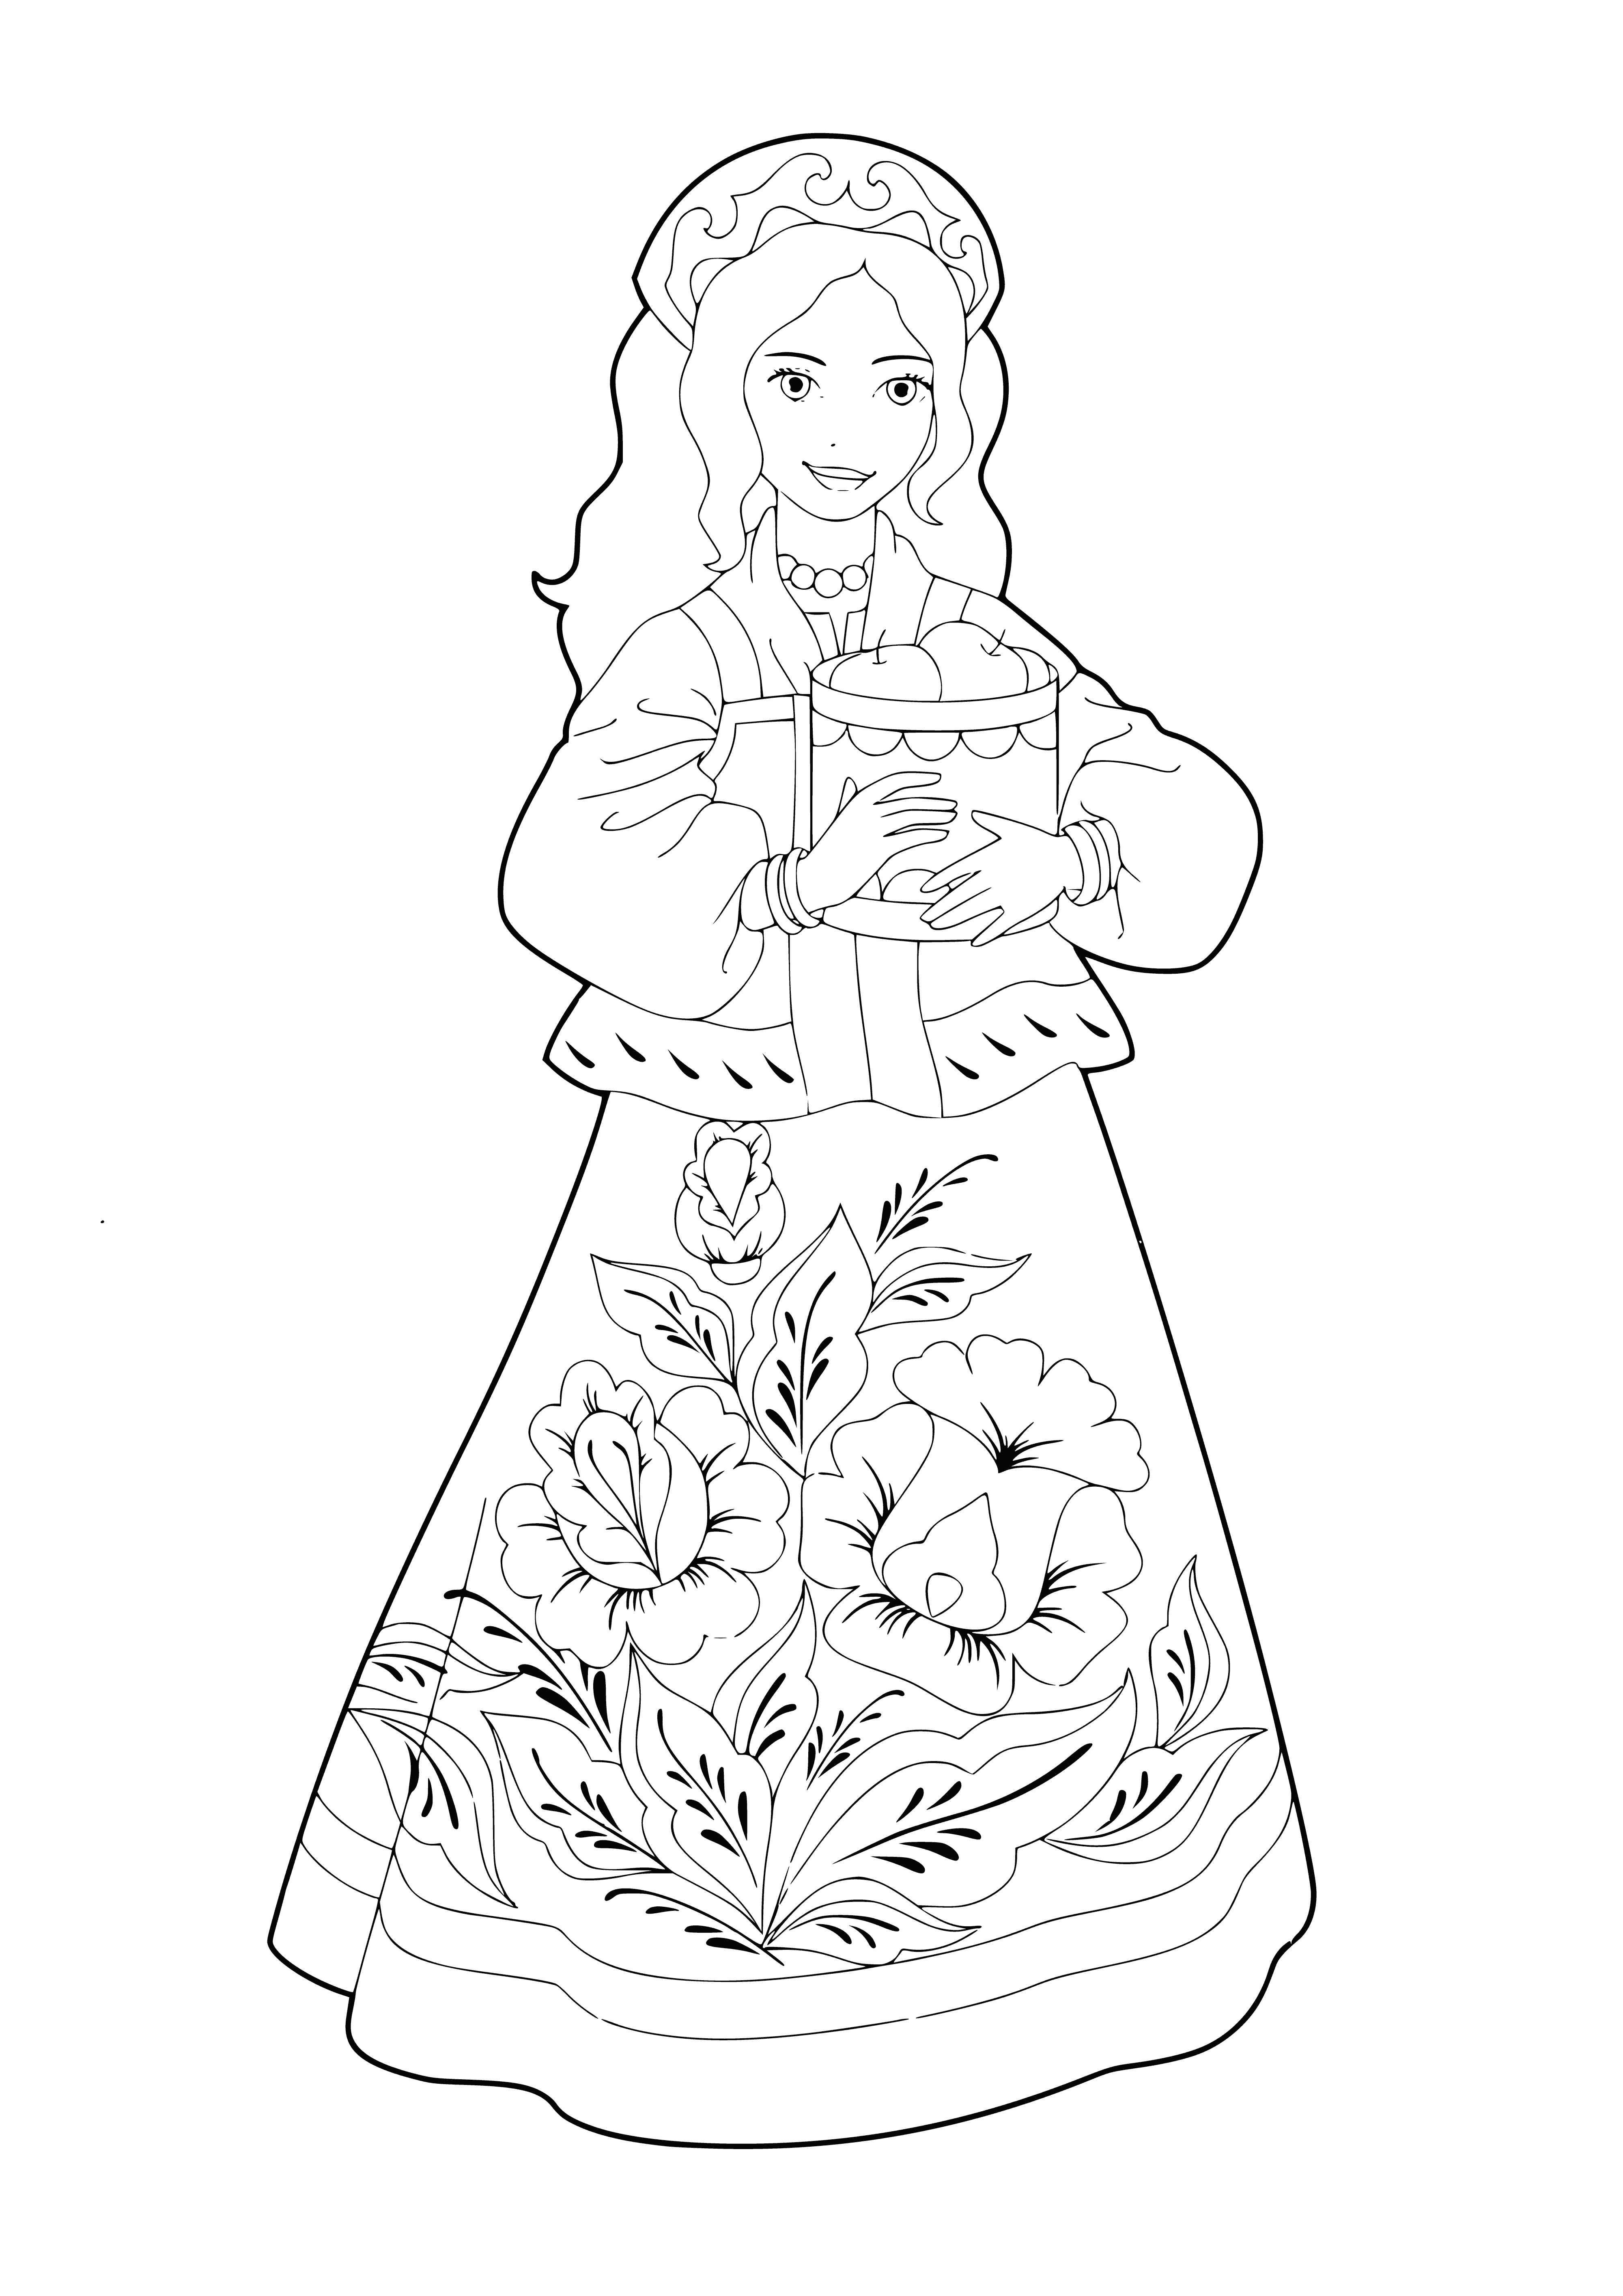 coloring page: Three Russian beauties wearing dresses and heels, two with blonde hair, one with brunette smiling happily.